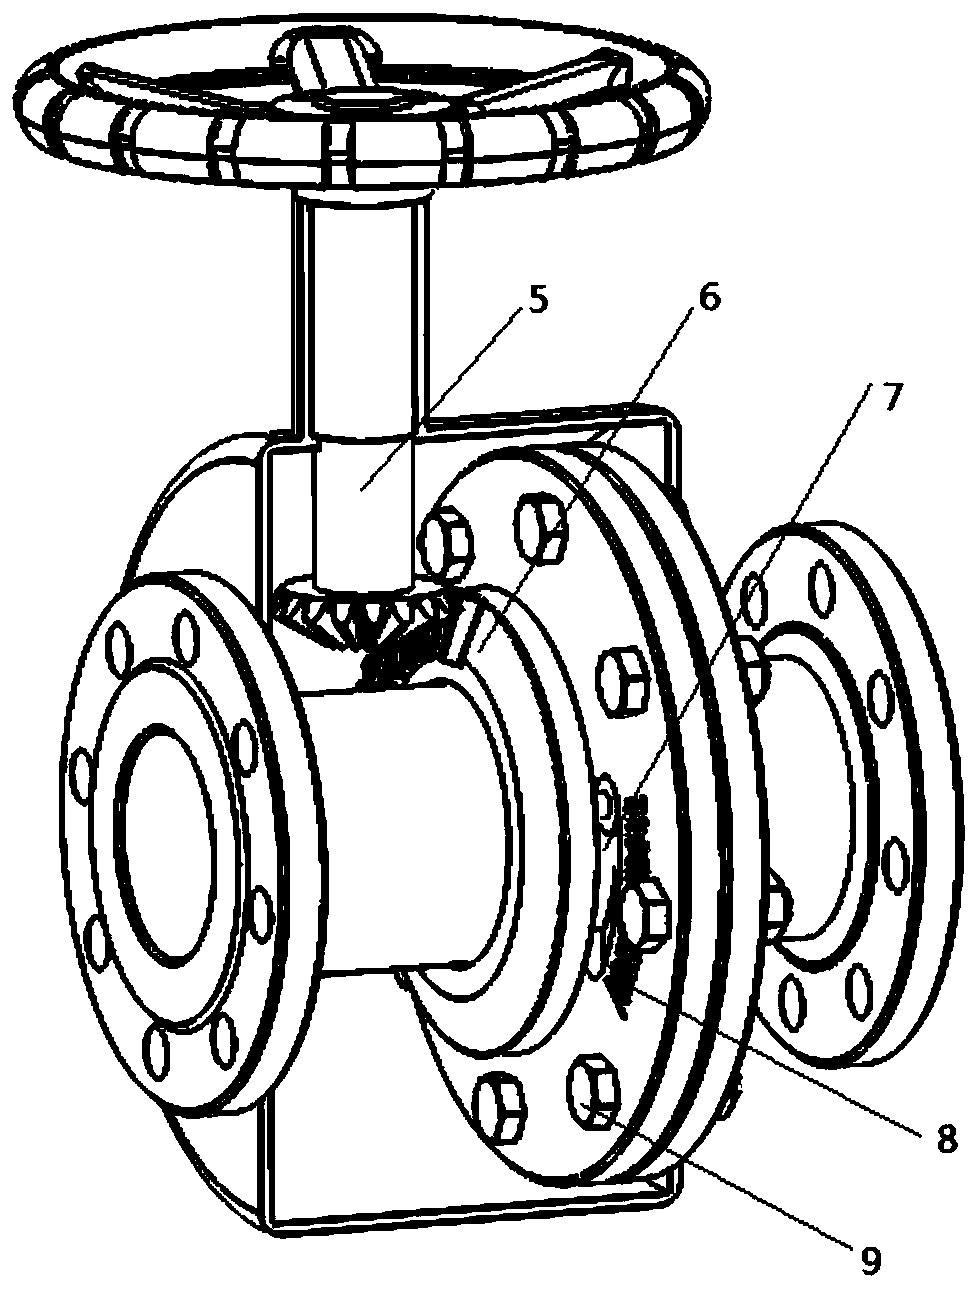 Flow limiting valve with adjustable section